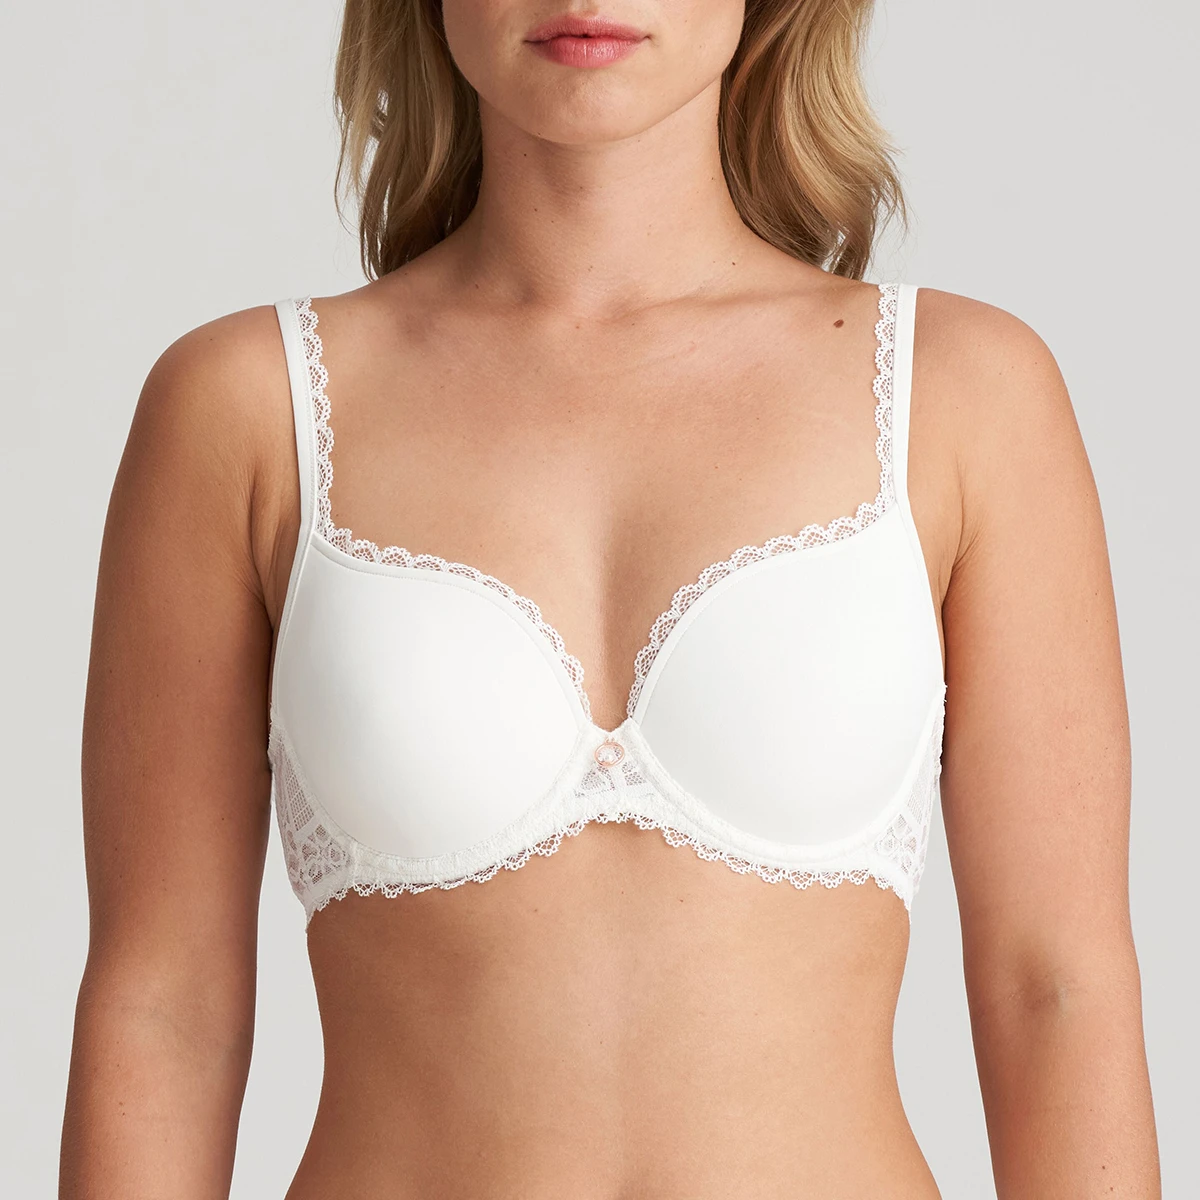 Bra 2020 - Save up to 50% - Big selection - Click to buy here